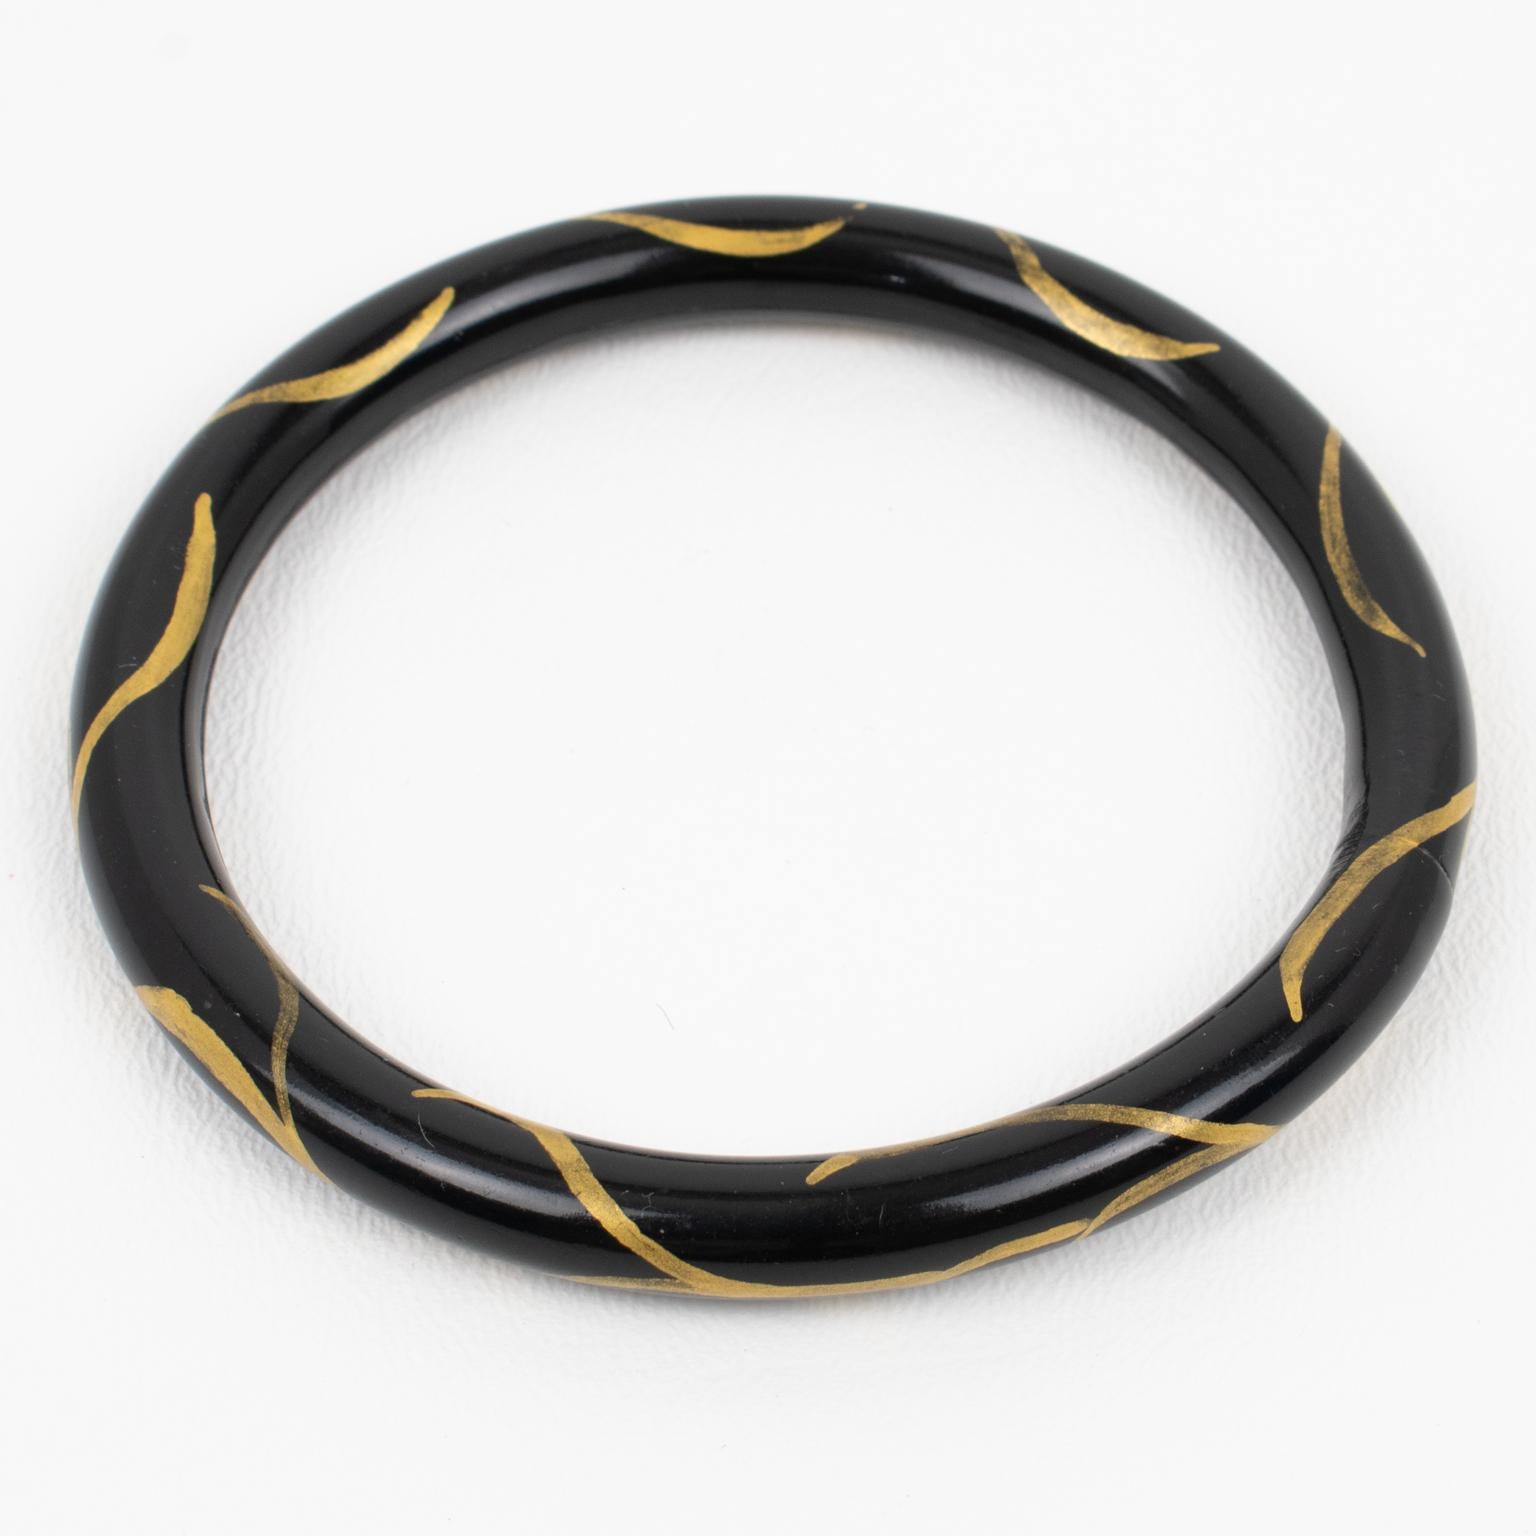 A lovely 1920s French Art Deco celluloid bracelet bangle. It features a light hollow tube shape with a branch design around the bracelet. 
The hollow bracelet technique is an ancient technique applied to jewelry at the turn of the 20th Century. The